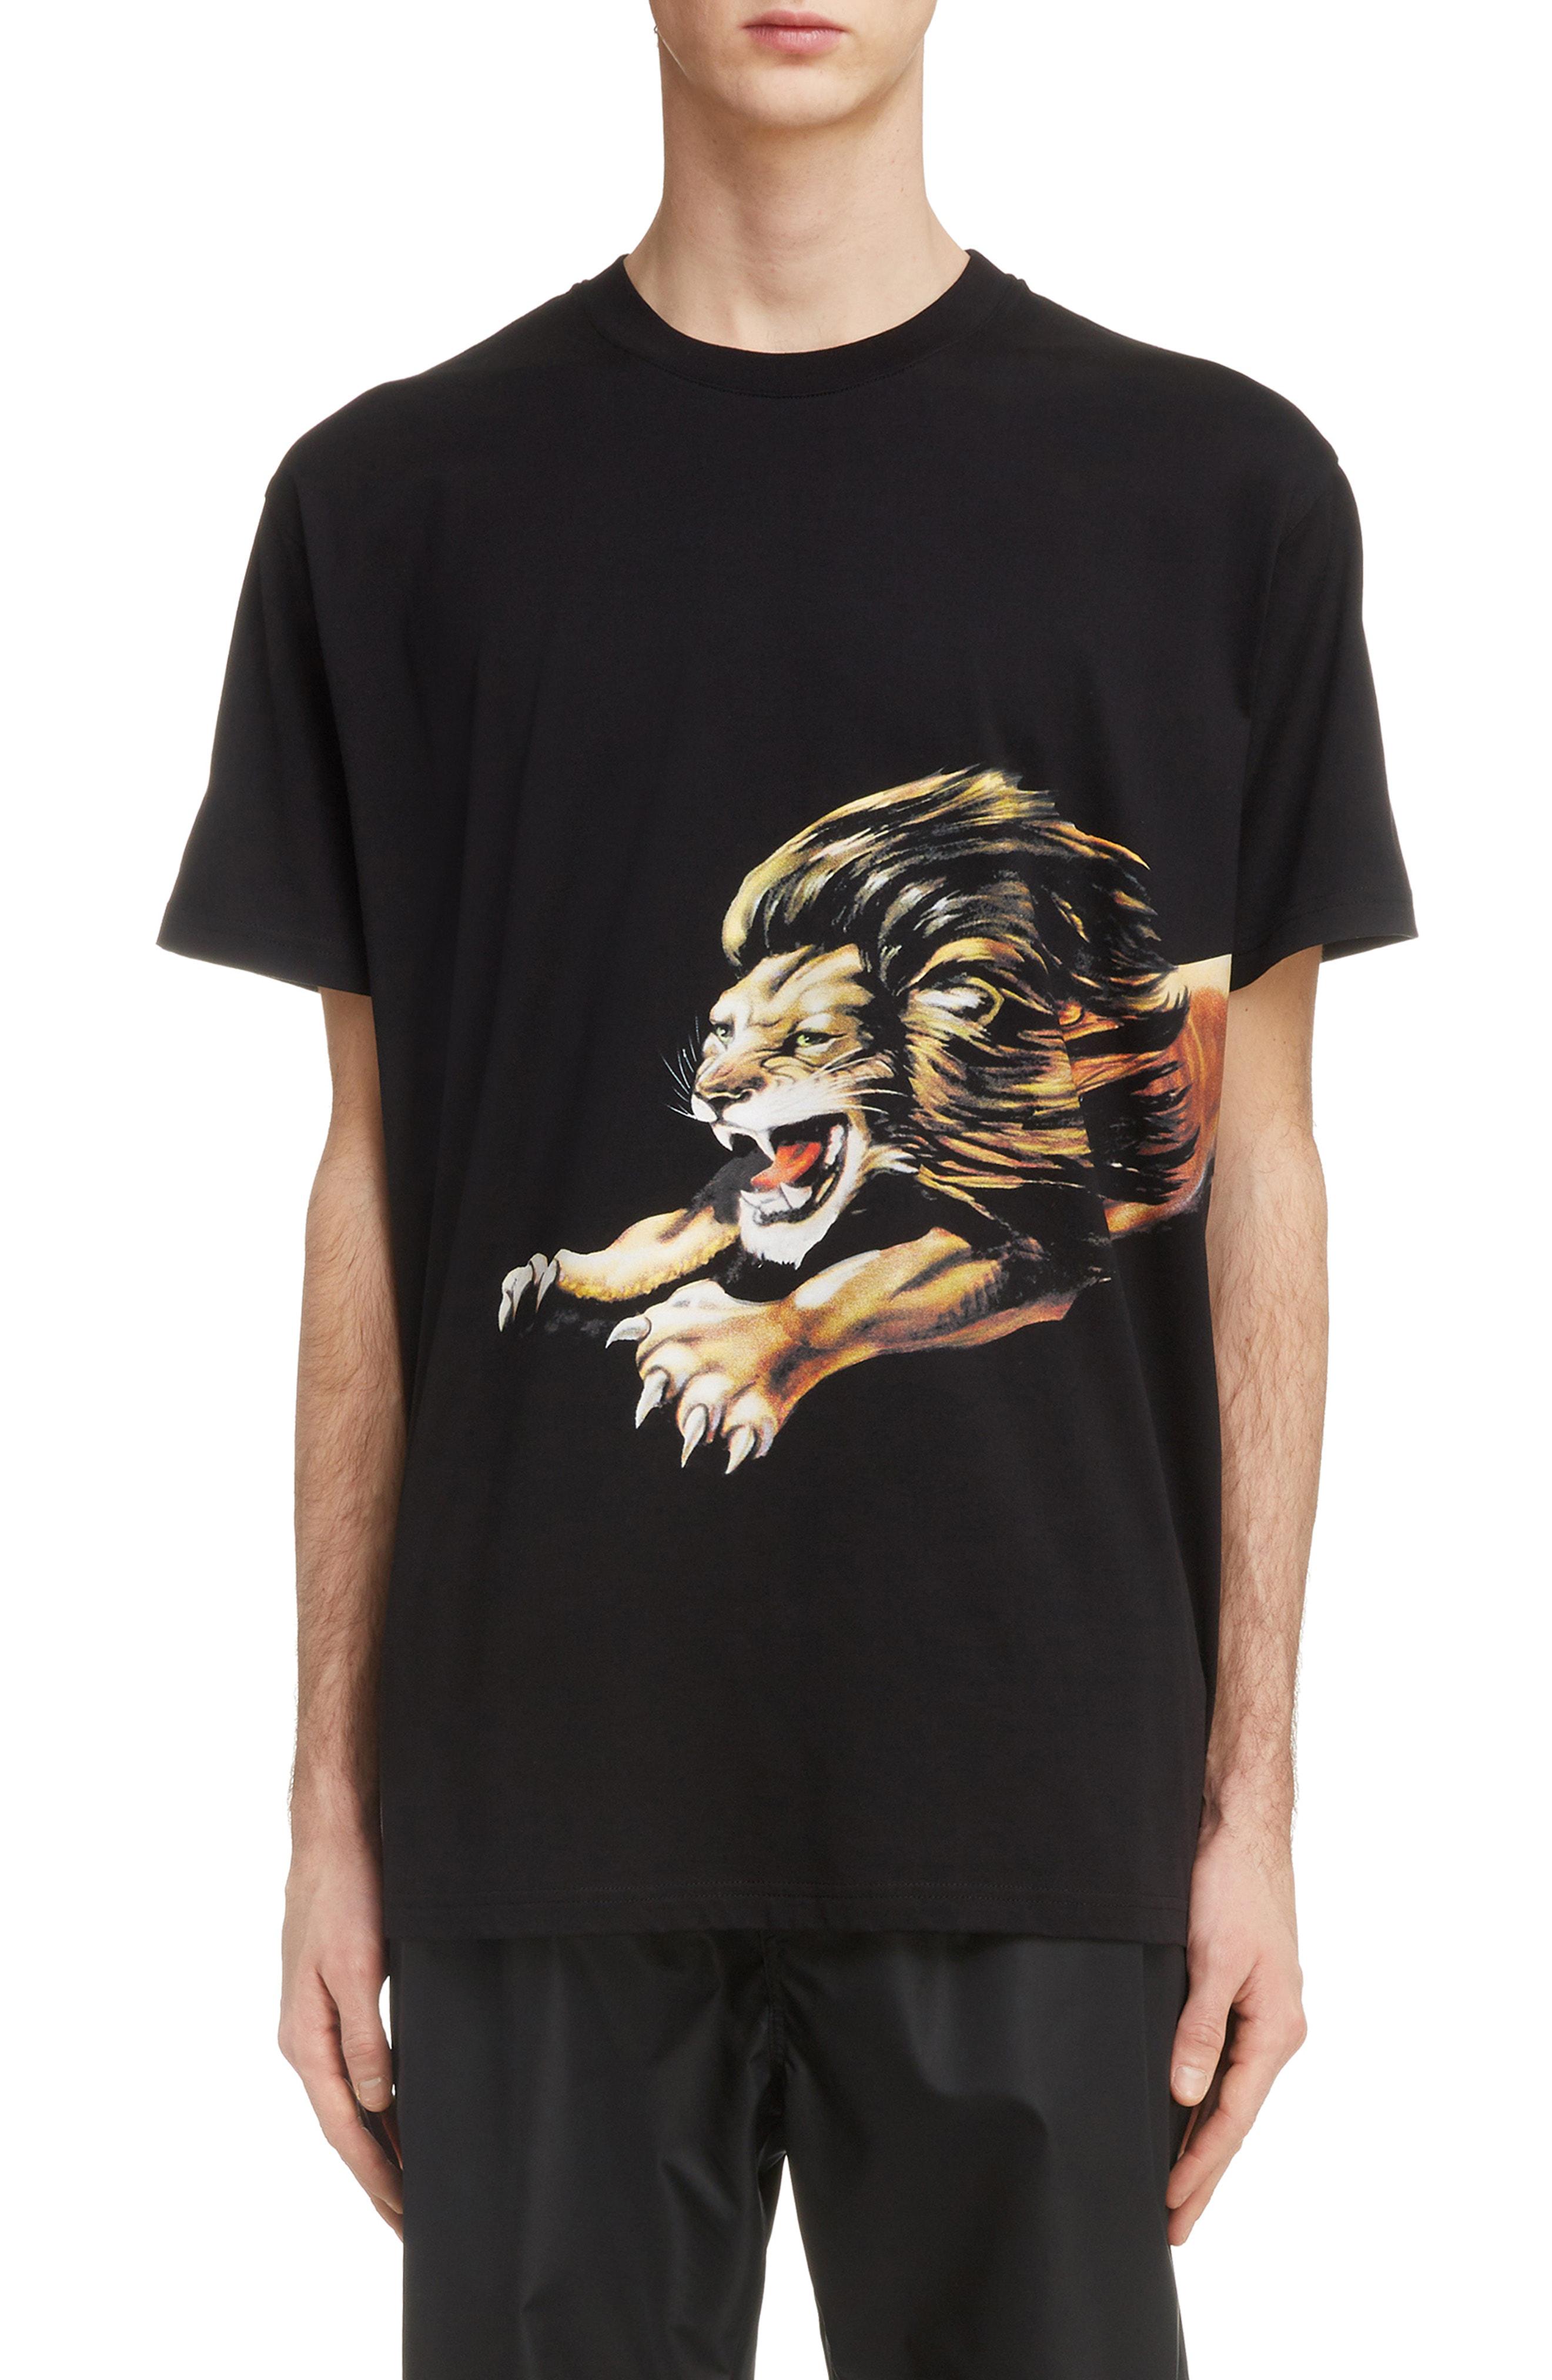 Lyst - Givenchy Lion Graphic T-shirt in Black for Men - Save 35.0%